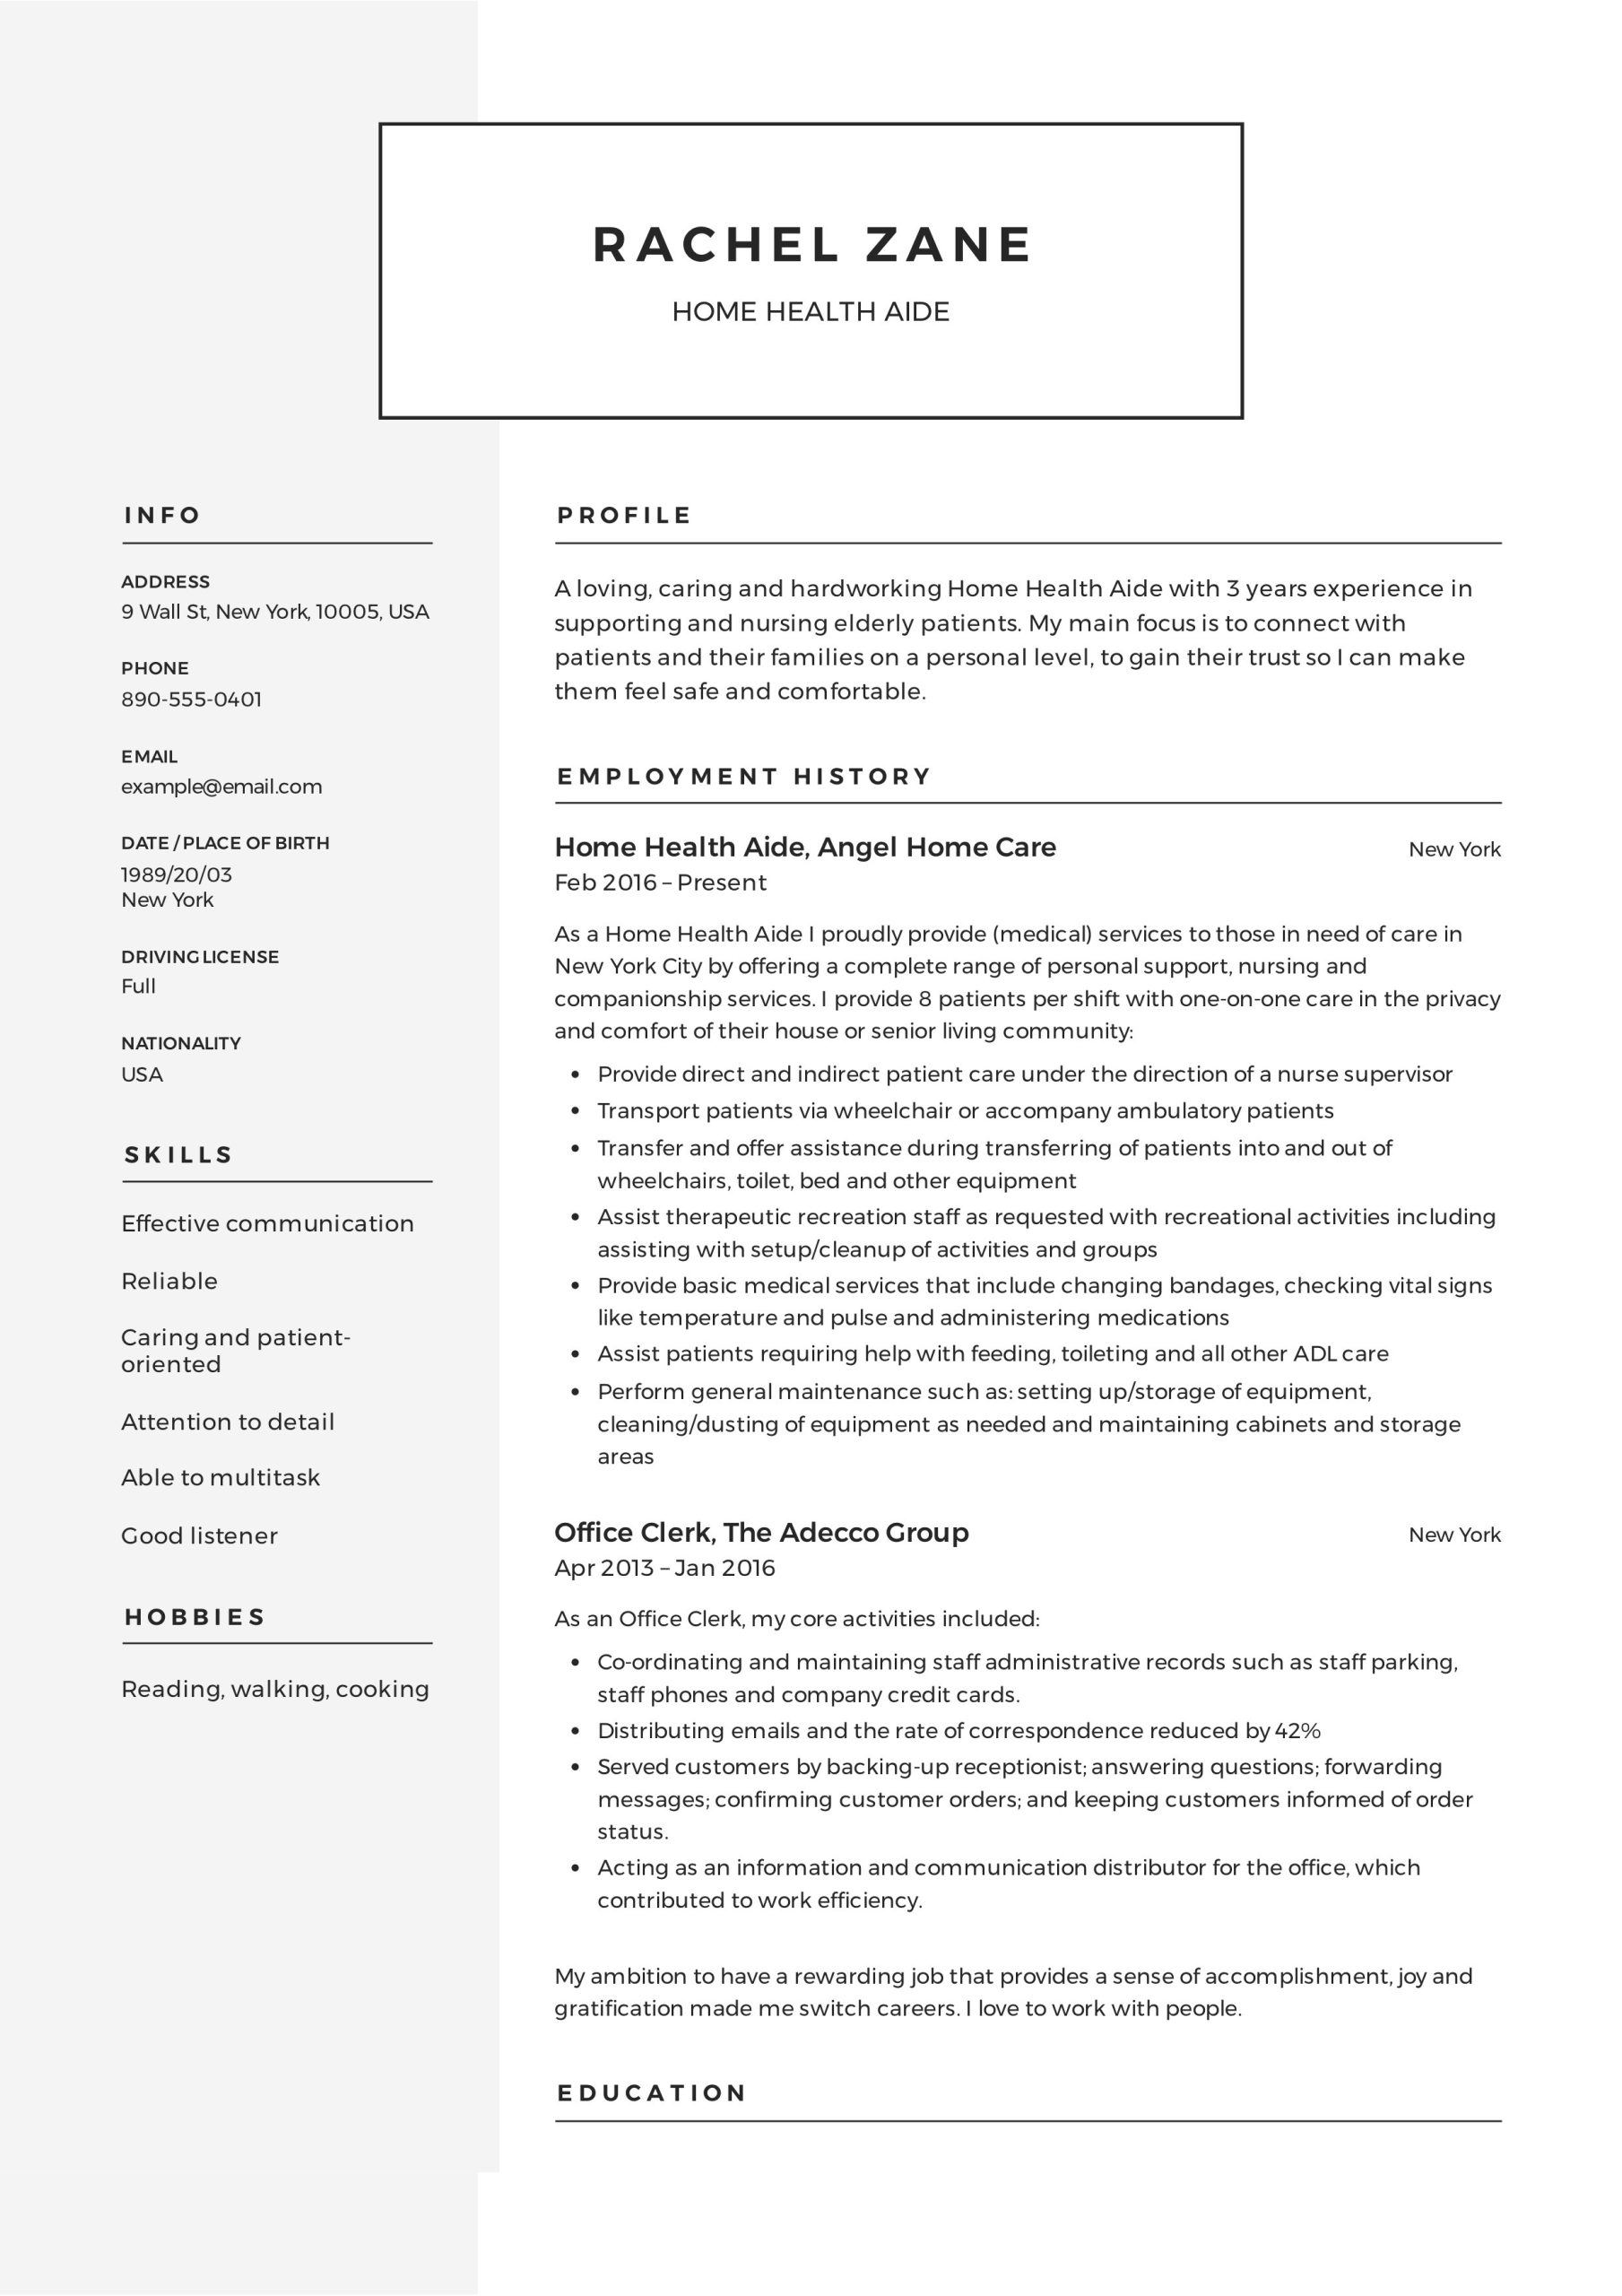 Home Health Care Administrator Resume Sample Home Health Aide Resume Guide 12 Examples Pdf